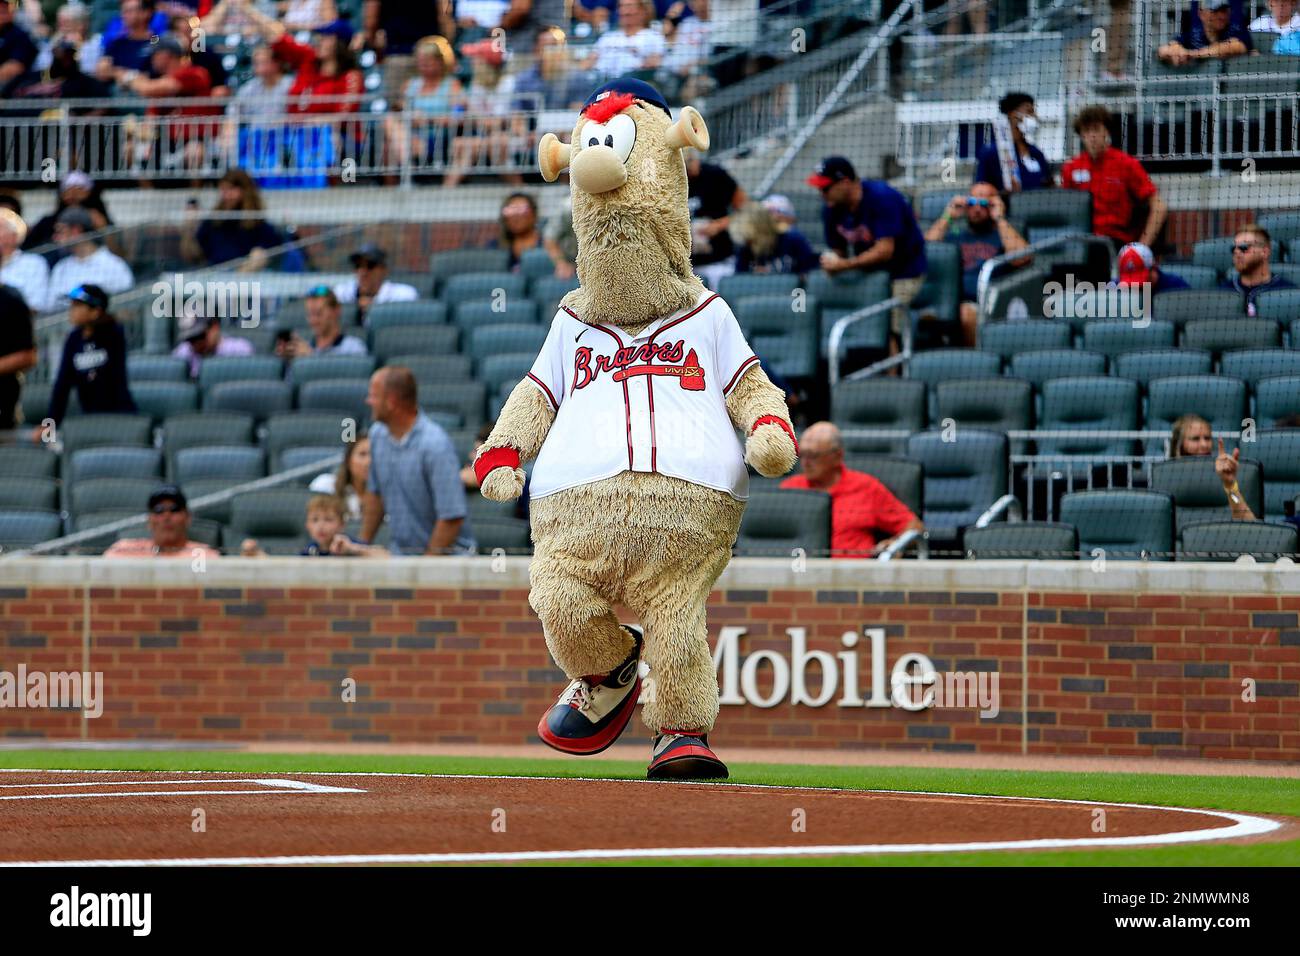 ATLANTA, GA - AUGUST 10: Blooper the Braves mascot during the Tuesday  evening MLB game between the Atlanta Braves and the Cincinnnati Reds on  August 10, 2021 at Truist Park in Atlanta